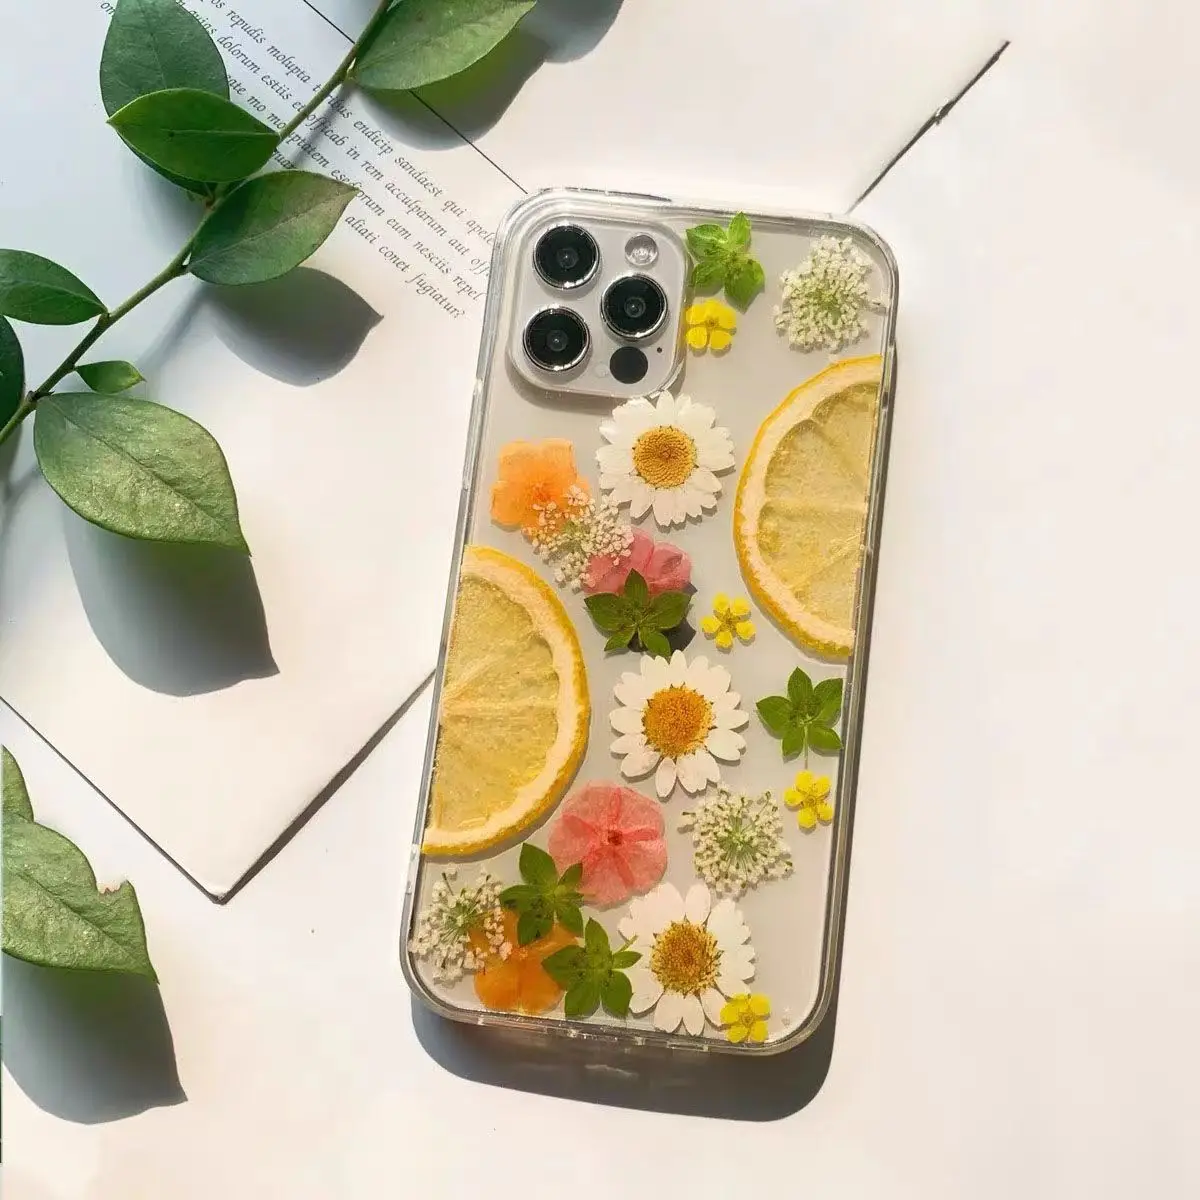 

Lemon Flowers Case For iPhone 13 Case Silicon For iPhone 11 12 13 Pro Max XR 7 8 11 Pro X XS Max Plus Mini Phone Cover